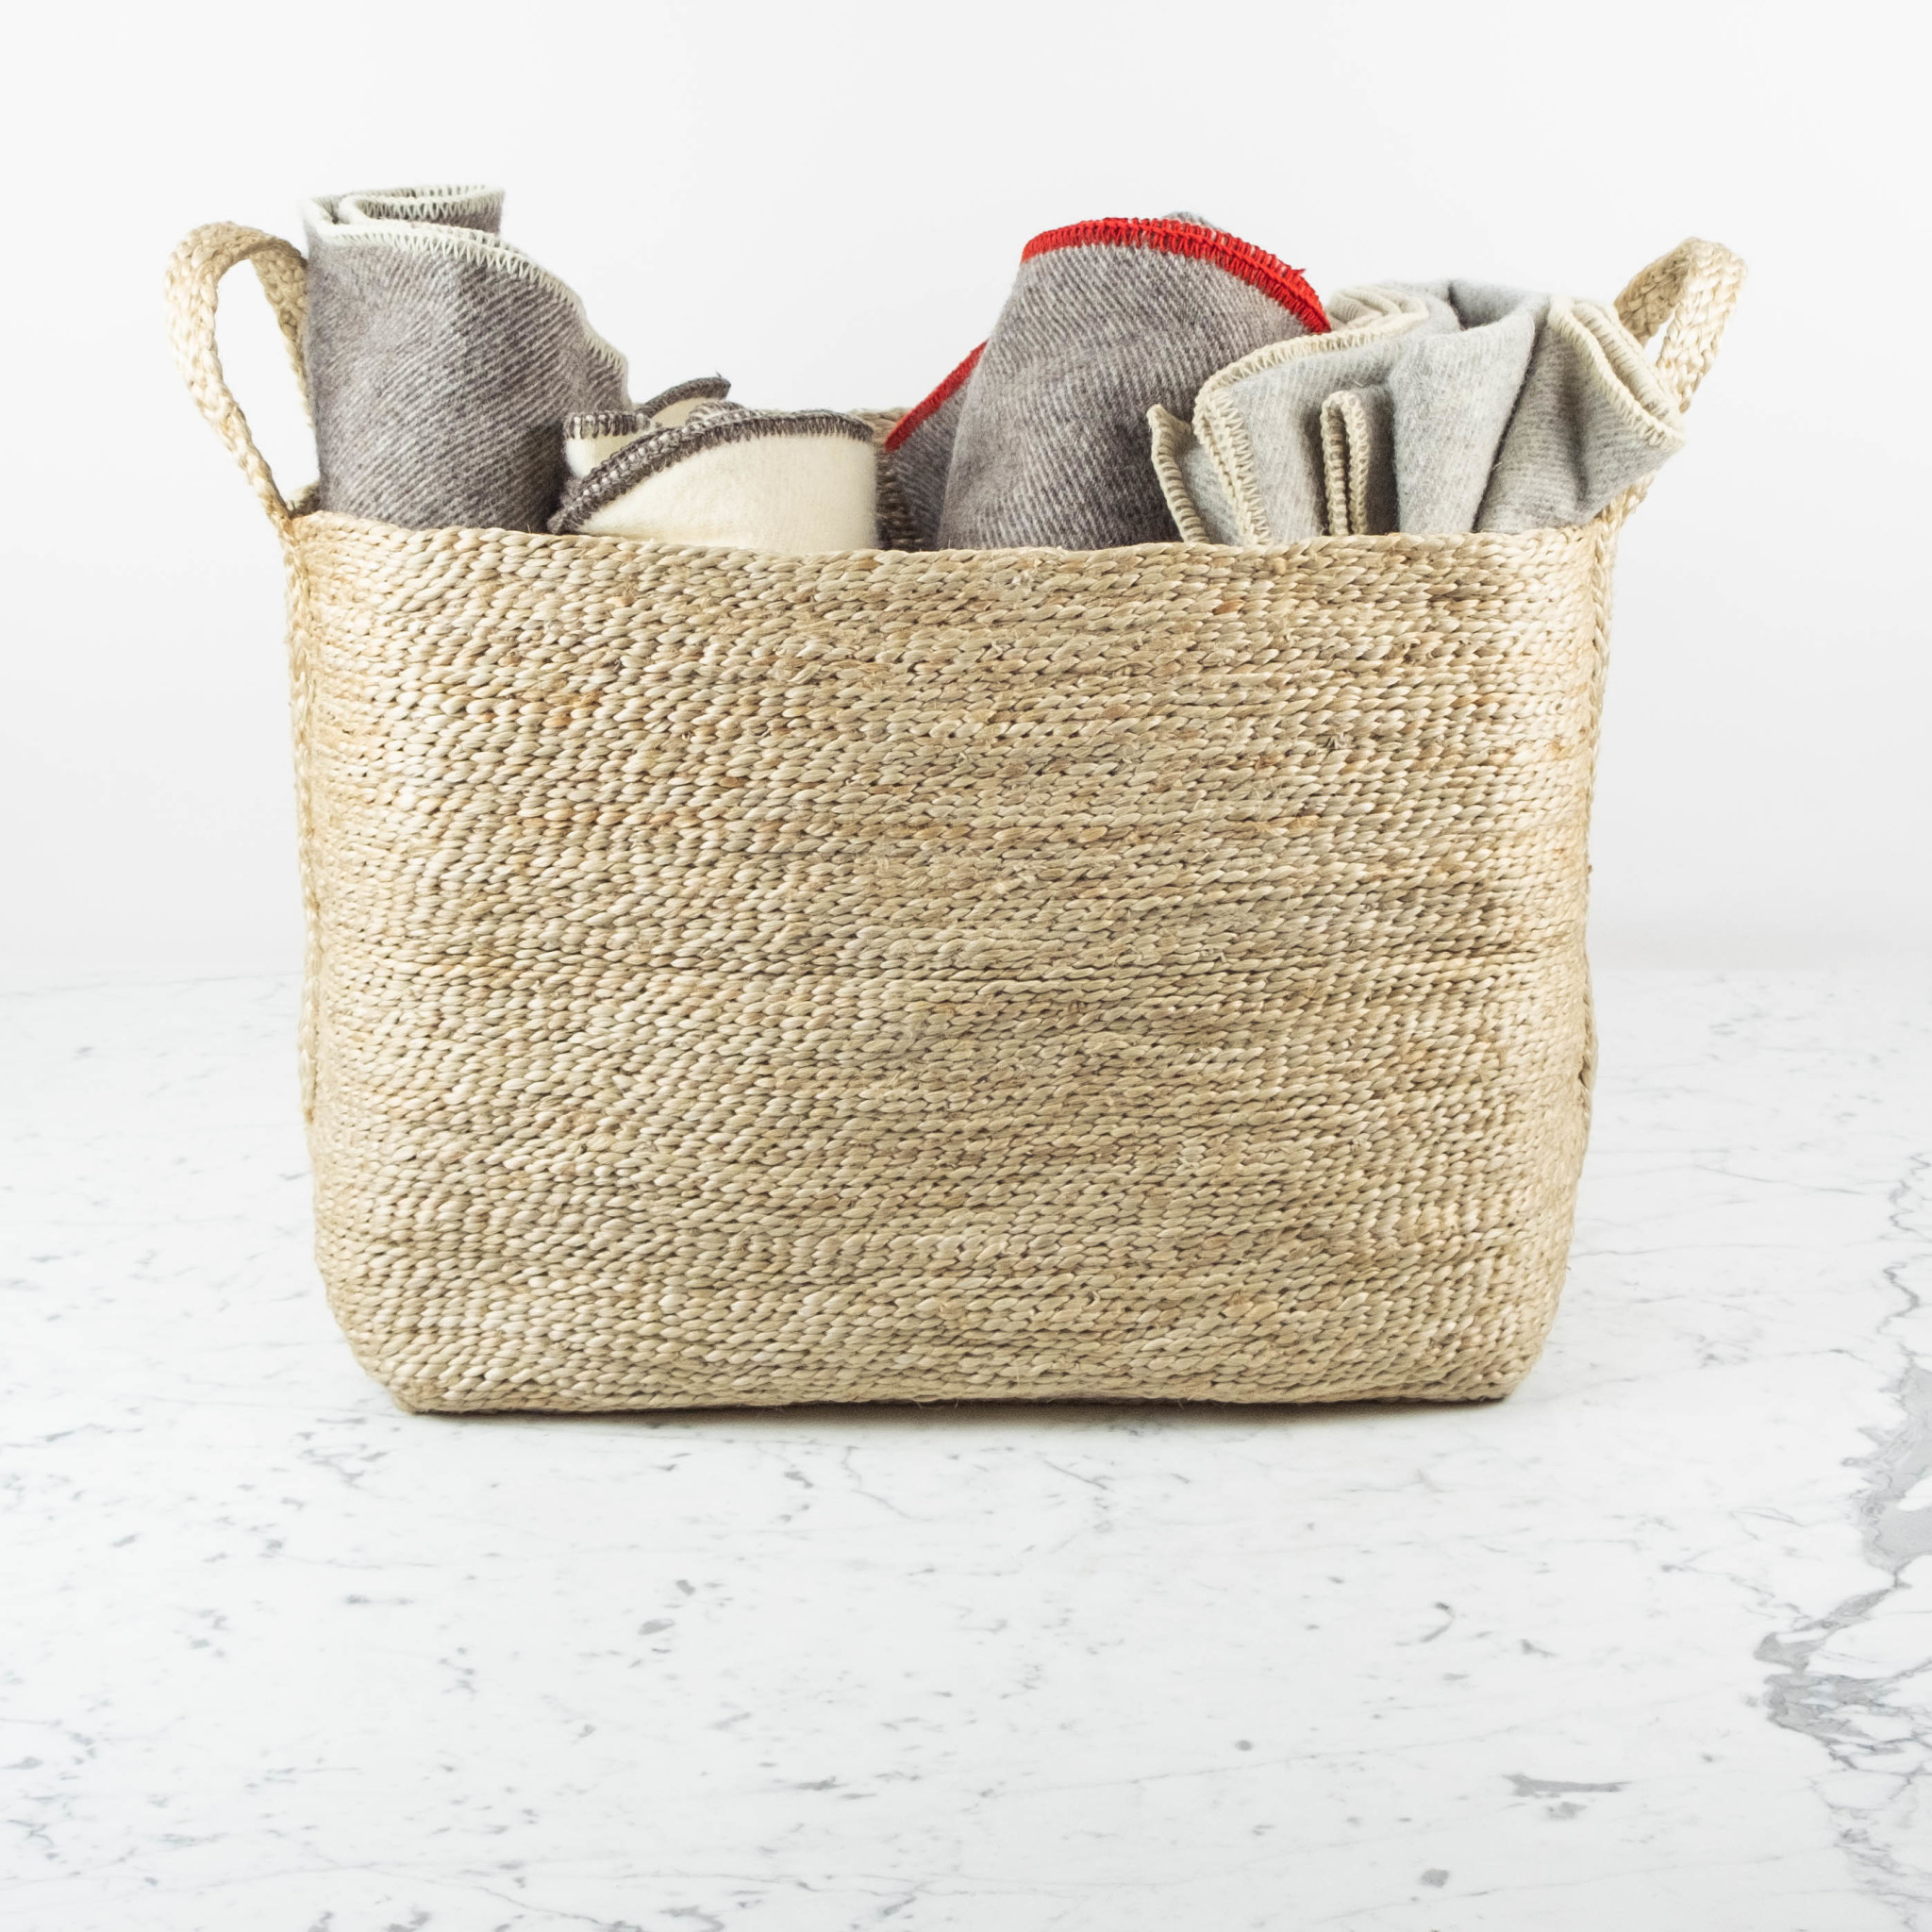 20 x 20 x 15 Extra Large Storage Basket with Lid, Cotton Rope